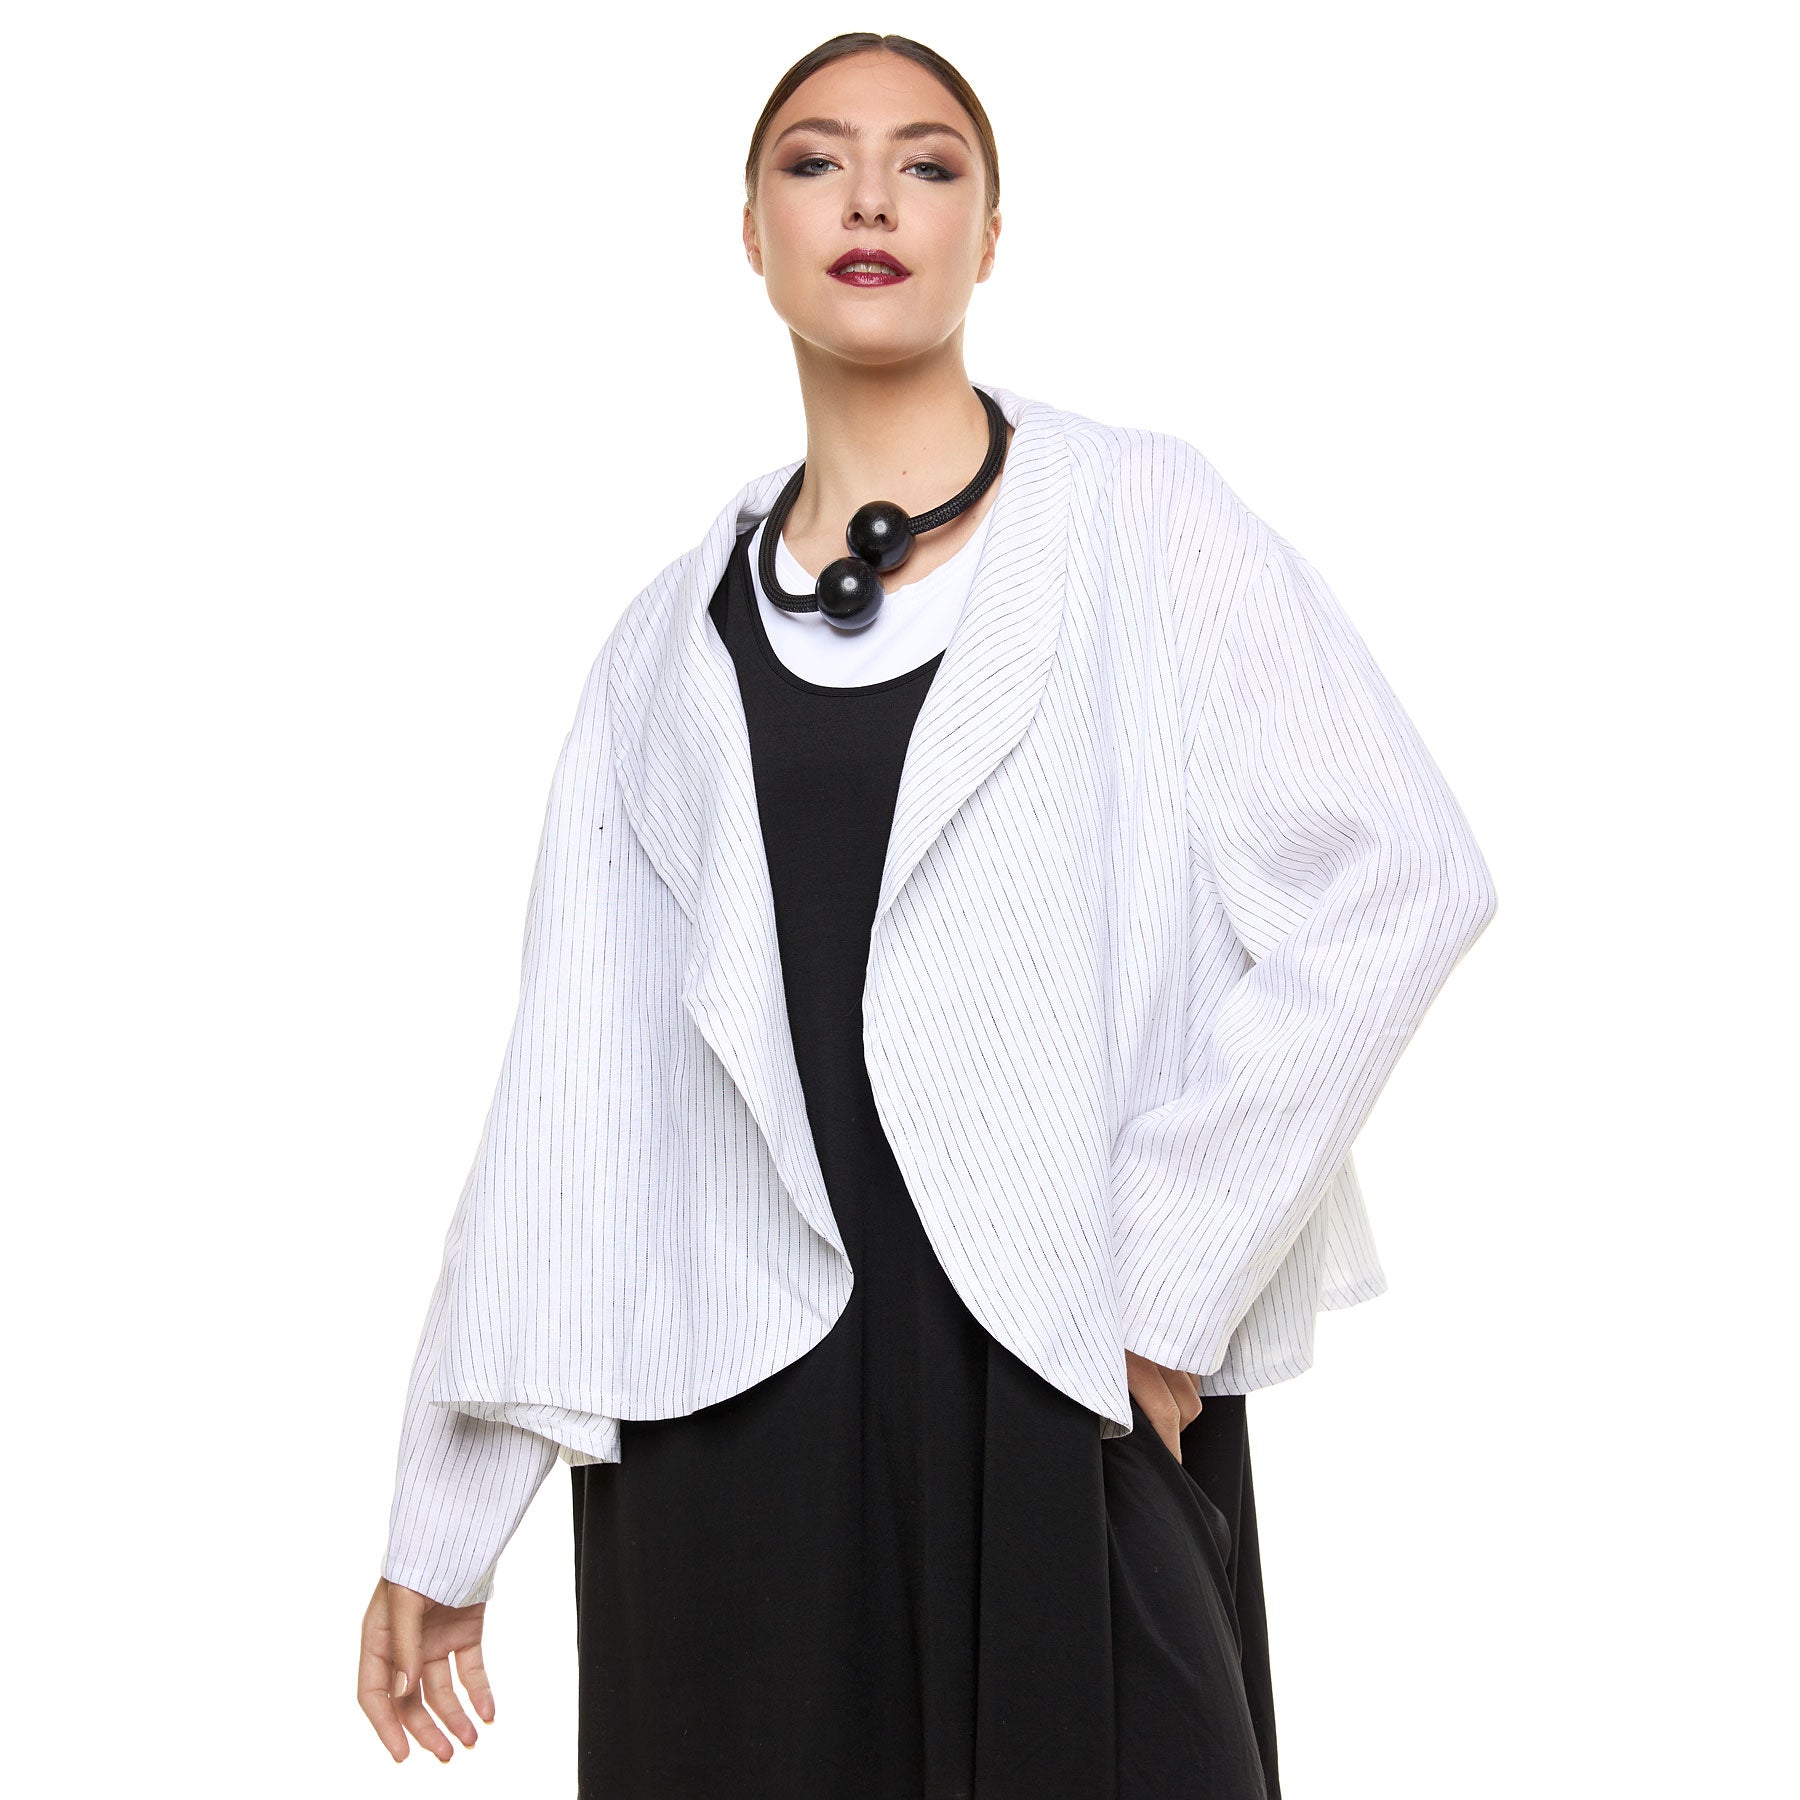 Chic & Simple Martha Cardigan - Black and White with Fine Stripe